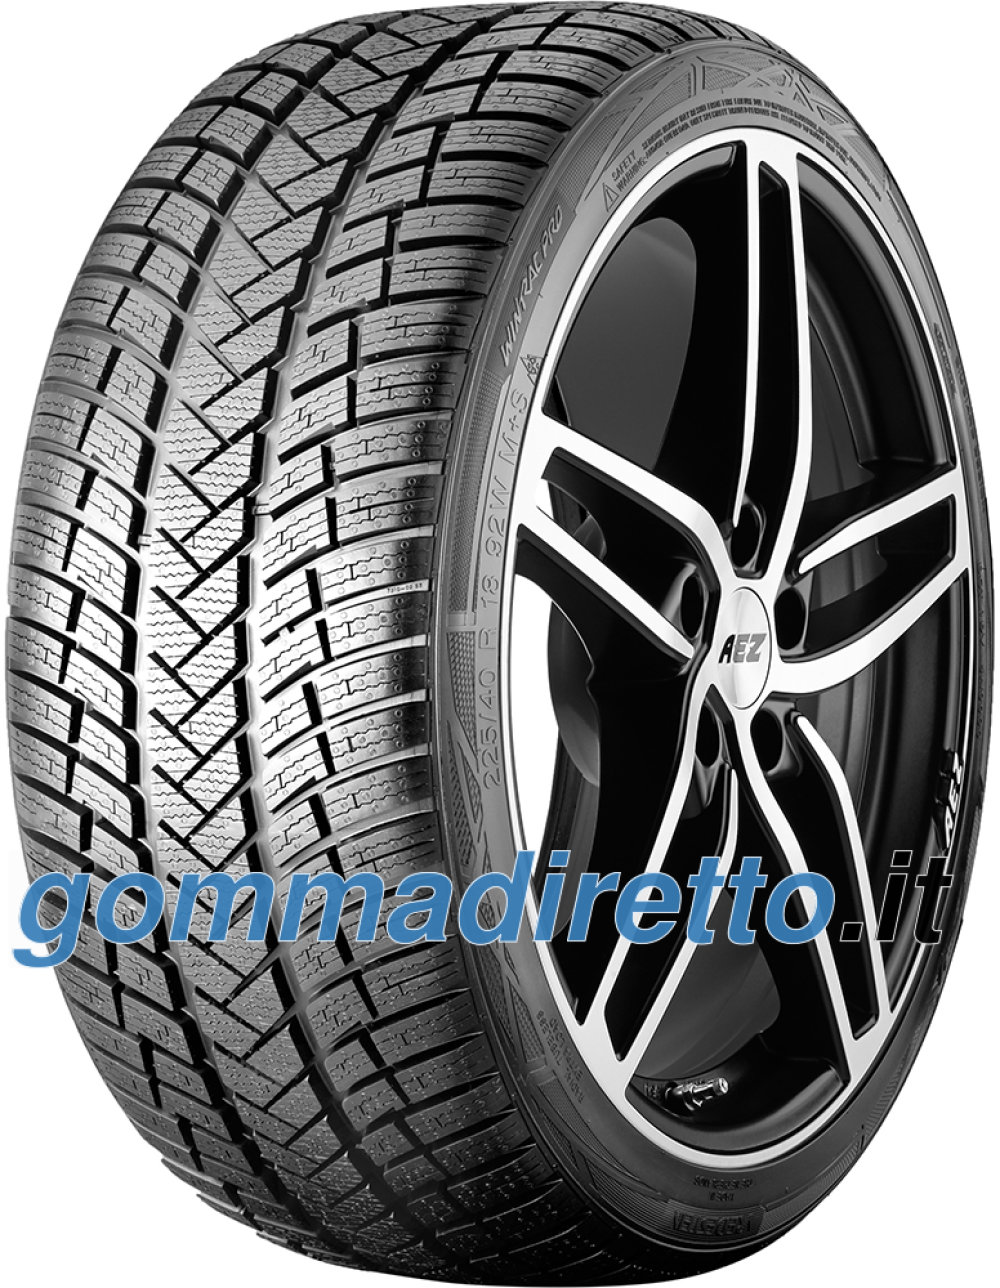 Image of        Vredestein Wintrac Pro ( 235/45 R17 97V XL )